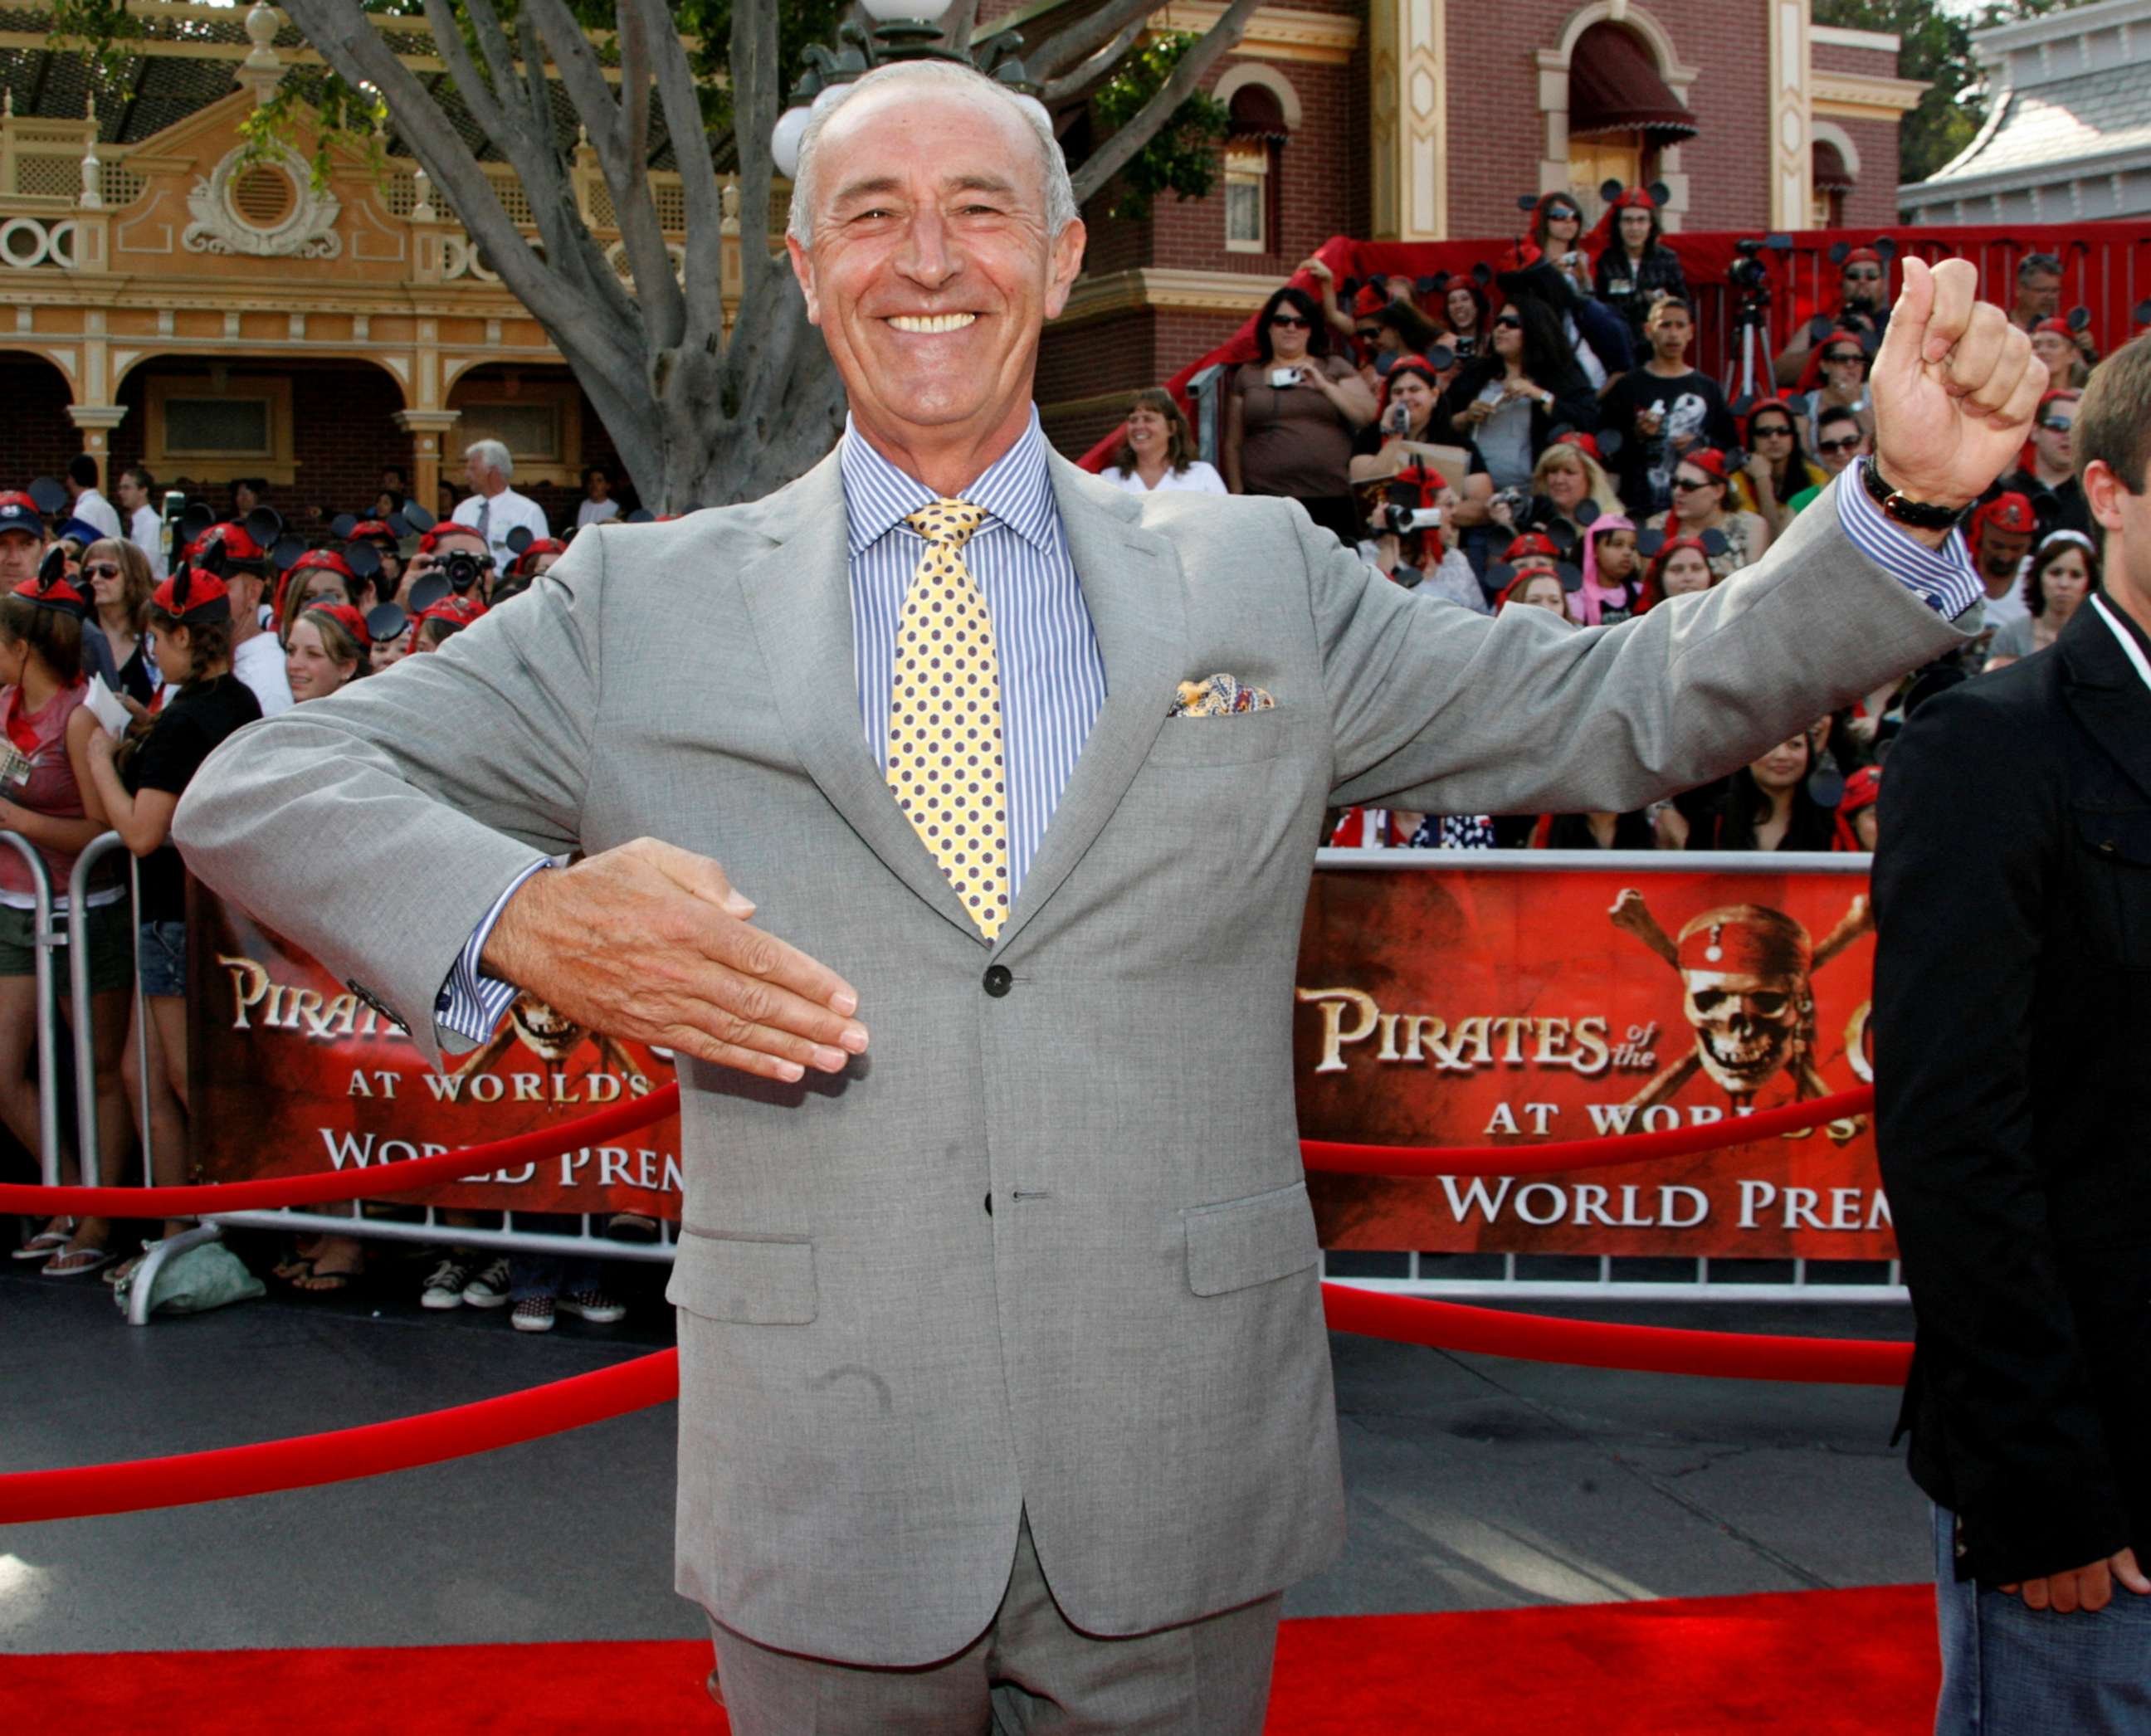 FILE PHOTO: Len Goodman, ballroom dancing expert and one of the judges on the television series "Dancing with the Stars," poses at the premiere of "Pirates of the Caribbean At World's End" at Disneyland in Anaheim, California, May 19, 2007.